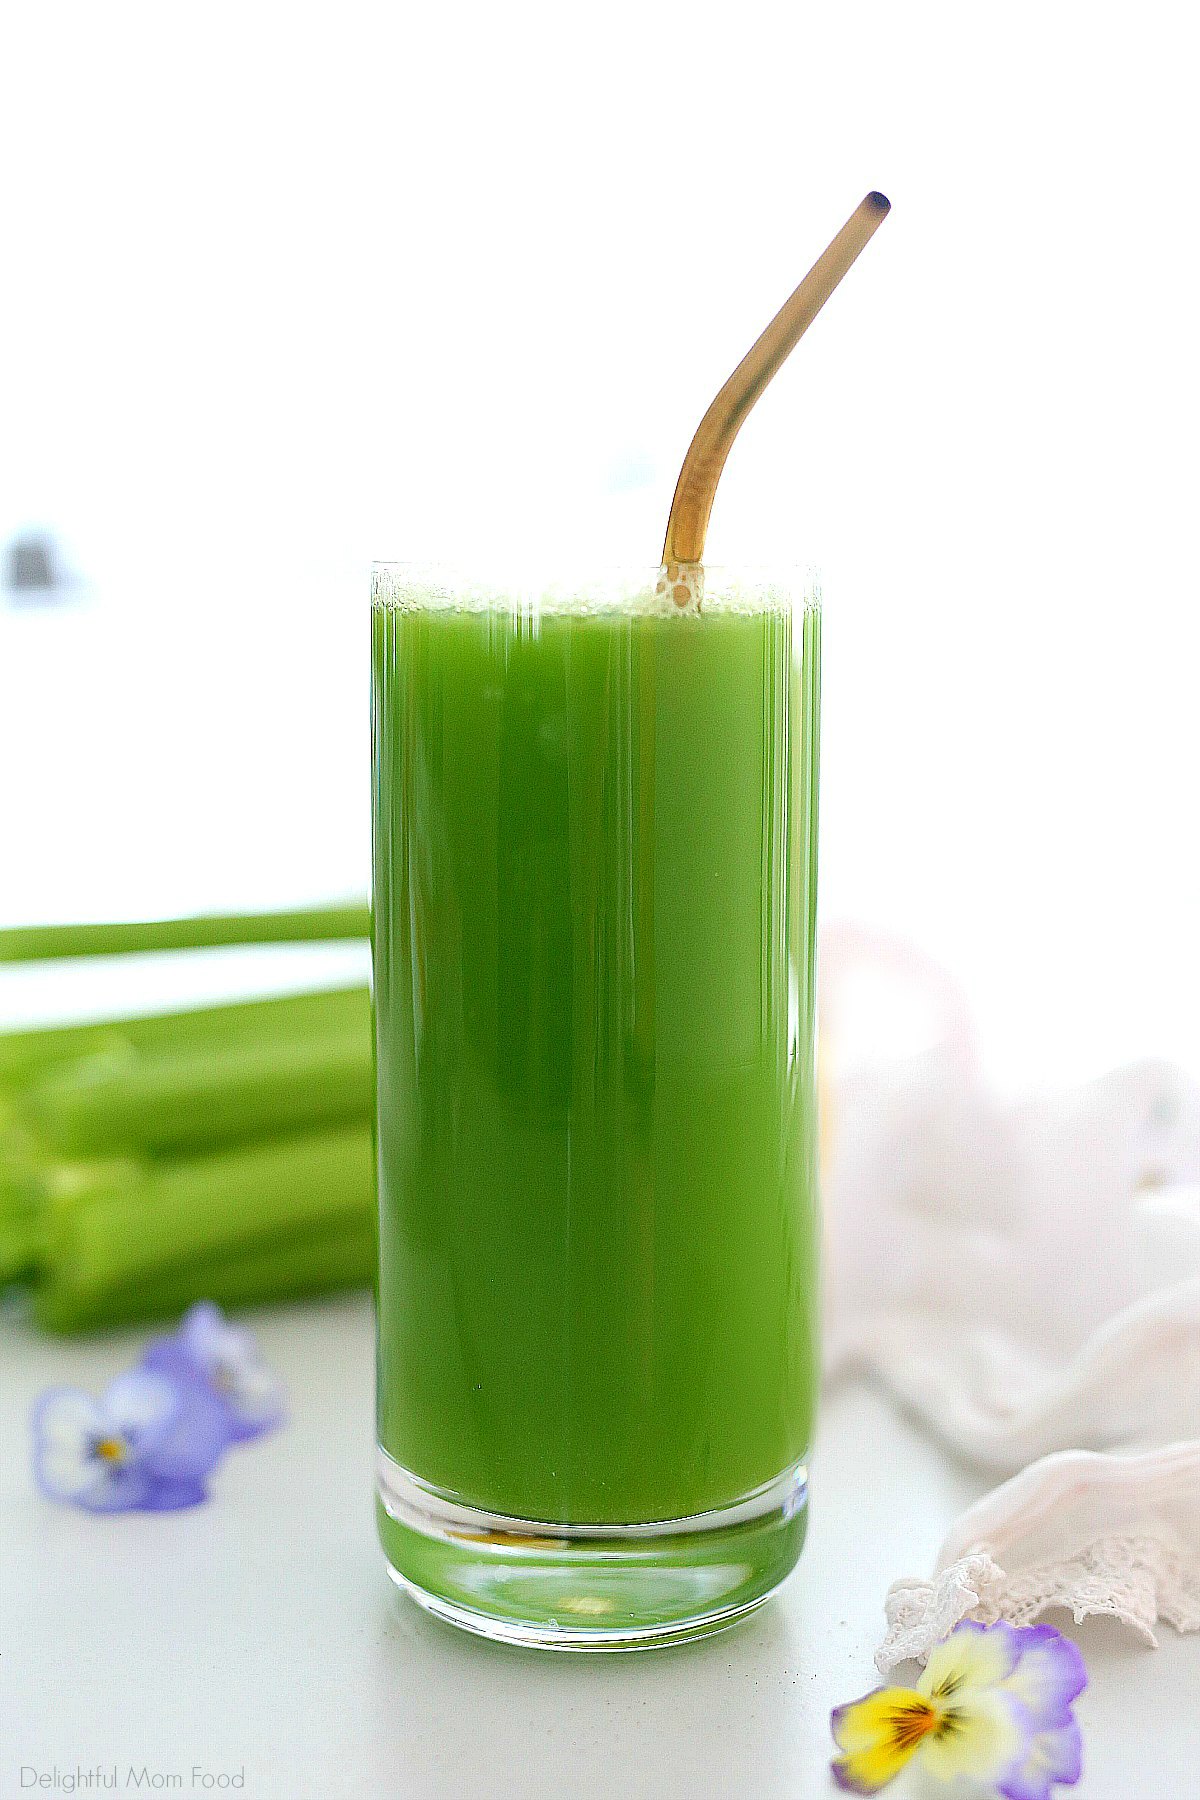 celery juice is a glass with a gold straw